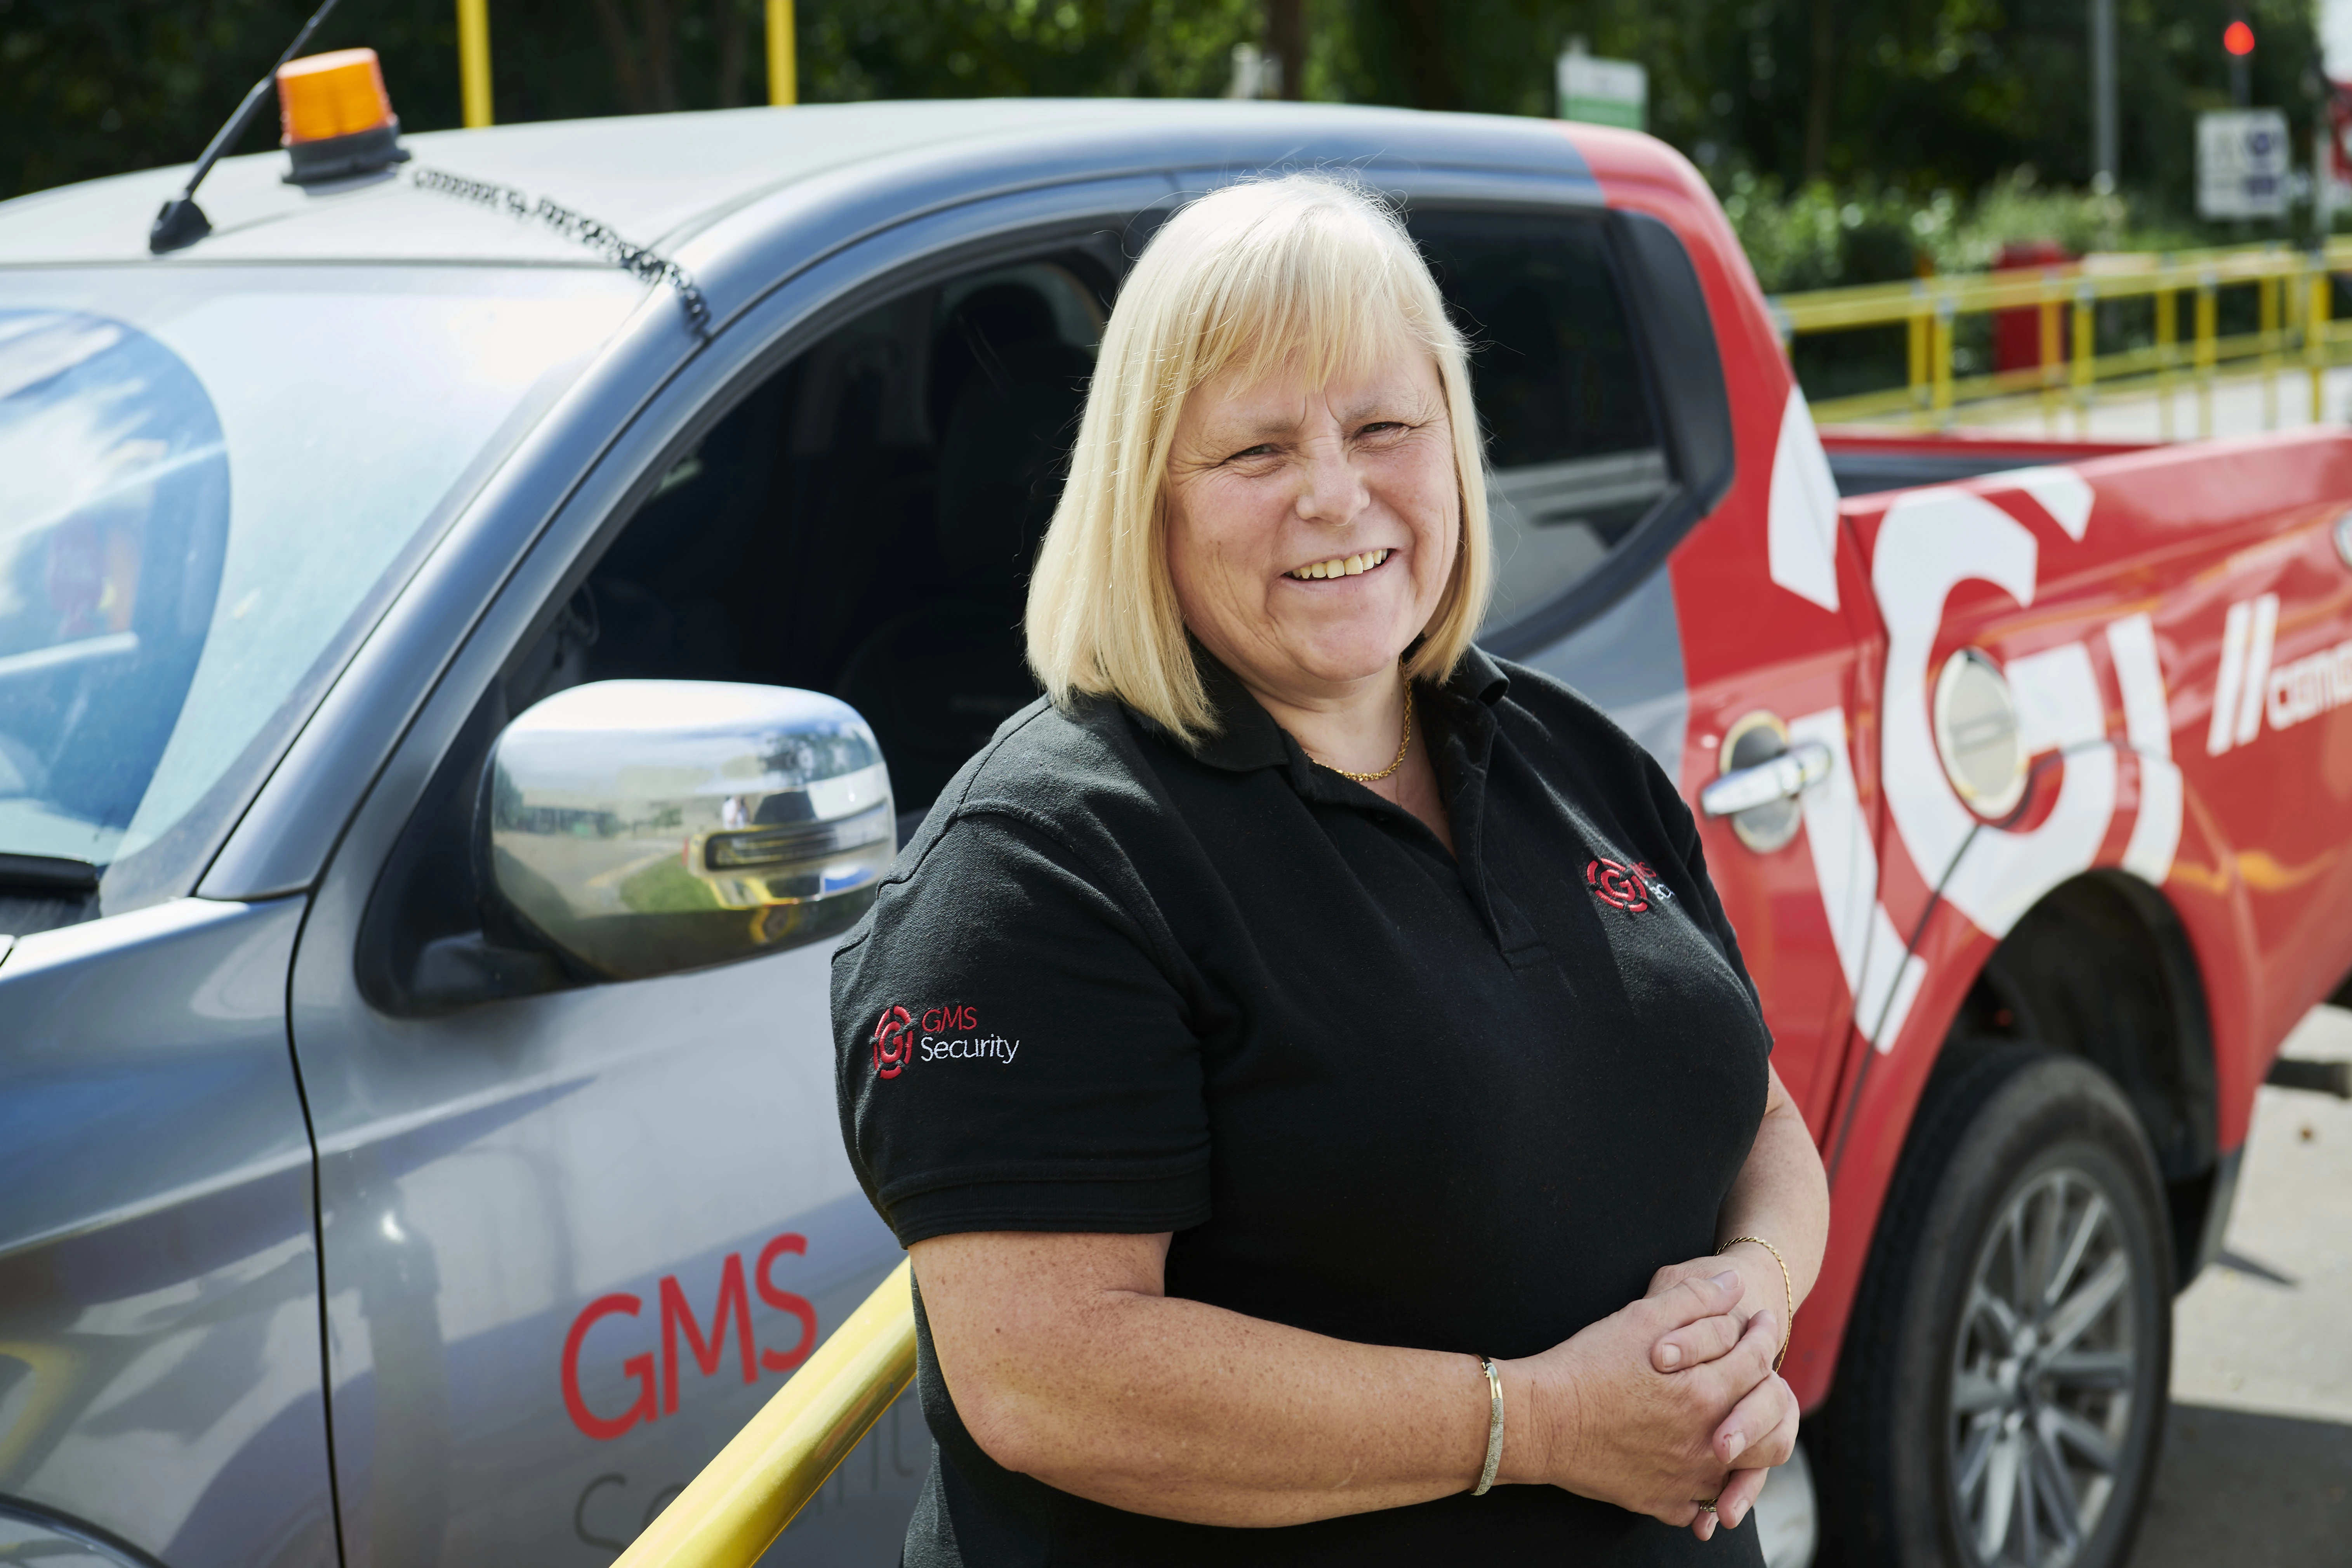 Tracey Cupkovic security officer for GMS Security